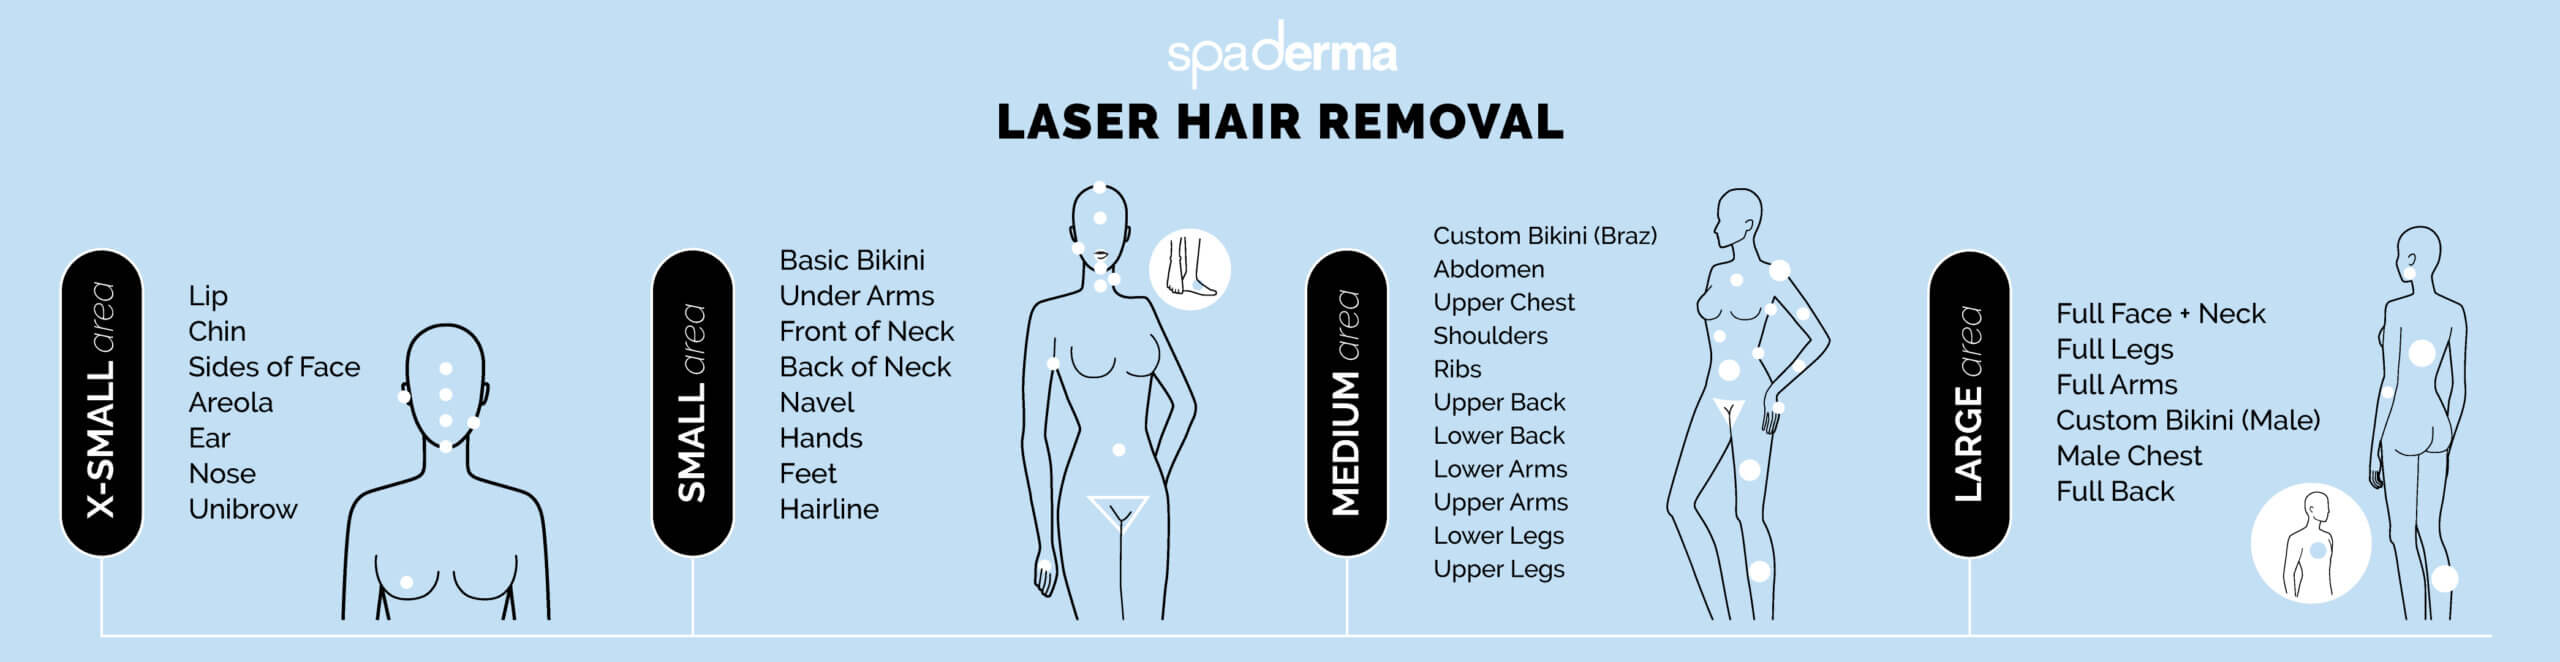 laser hair removal areas chart